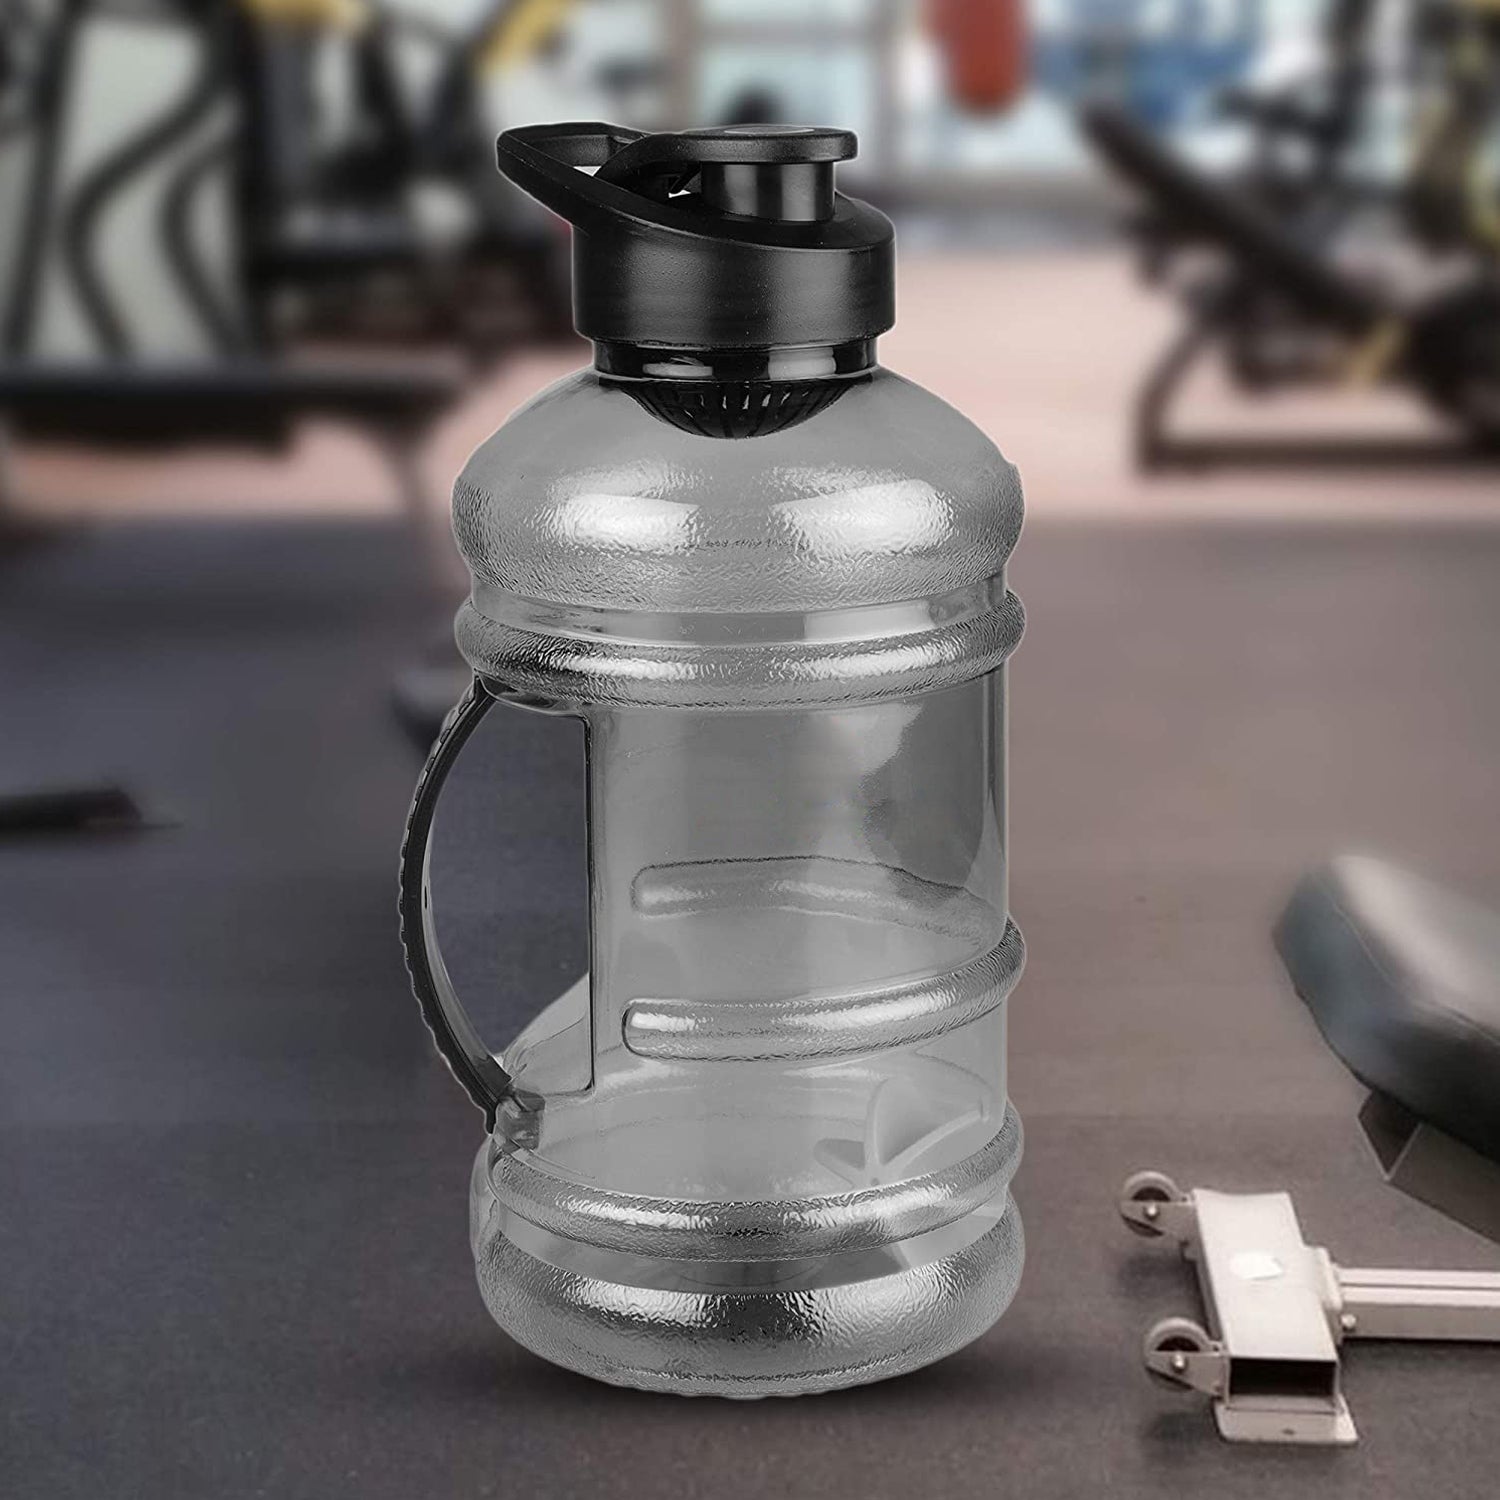 4828 Sports Gym 1.5 Liters Gallon Water Bottle with Mixer and Strainer DeoDap